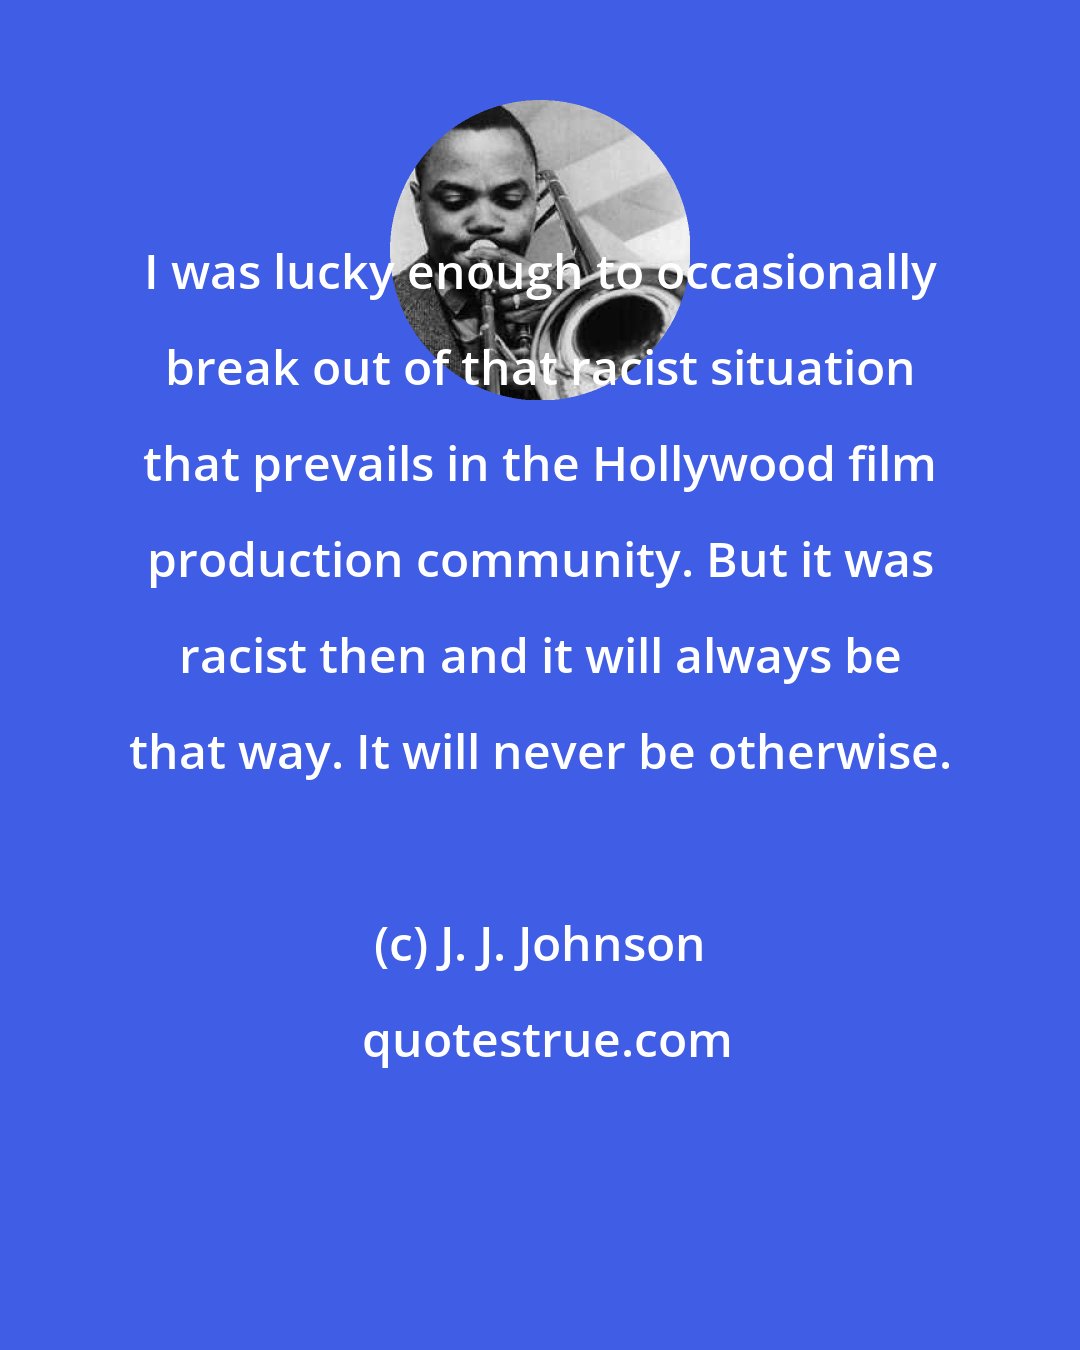 J. J. Johnson: I was lucky enough to occasionally break out of that racist situation that prevails in the Hollywood film production community. But it was racist then and it will always be that way. It will never be otherwise.